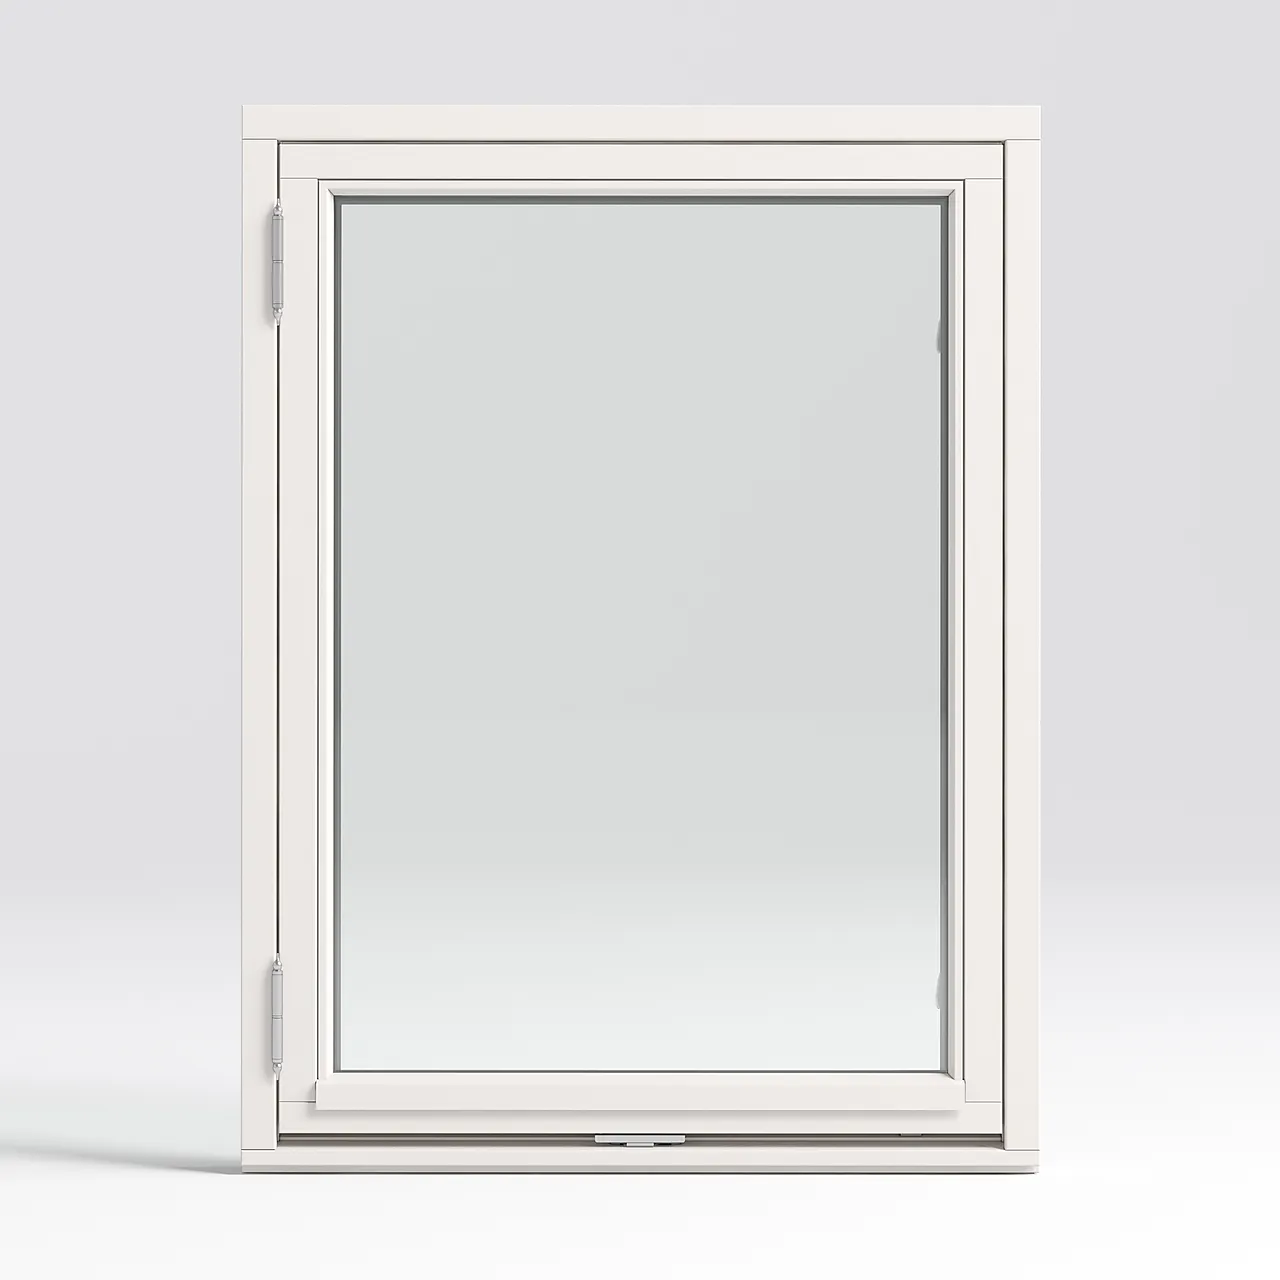 SIDEH 06X11 UNO 1R H 1,0/1,2 N ATREE-GLASS 1,0/1,2 2 LAG null - null - 3